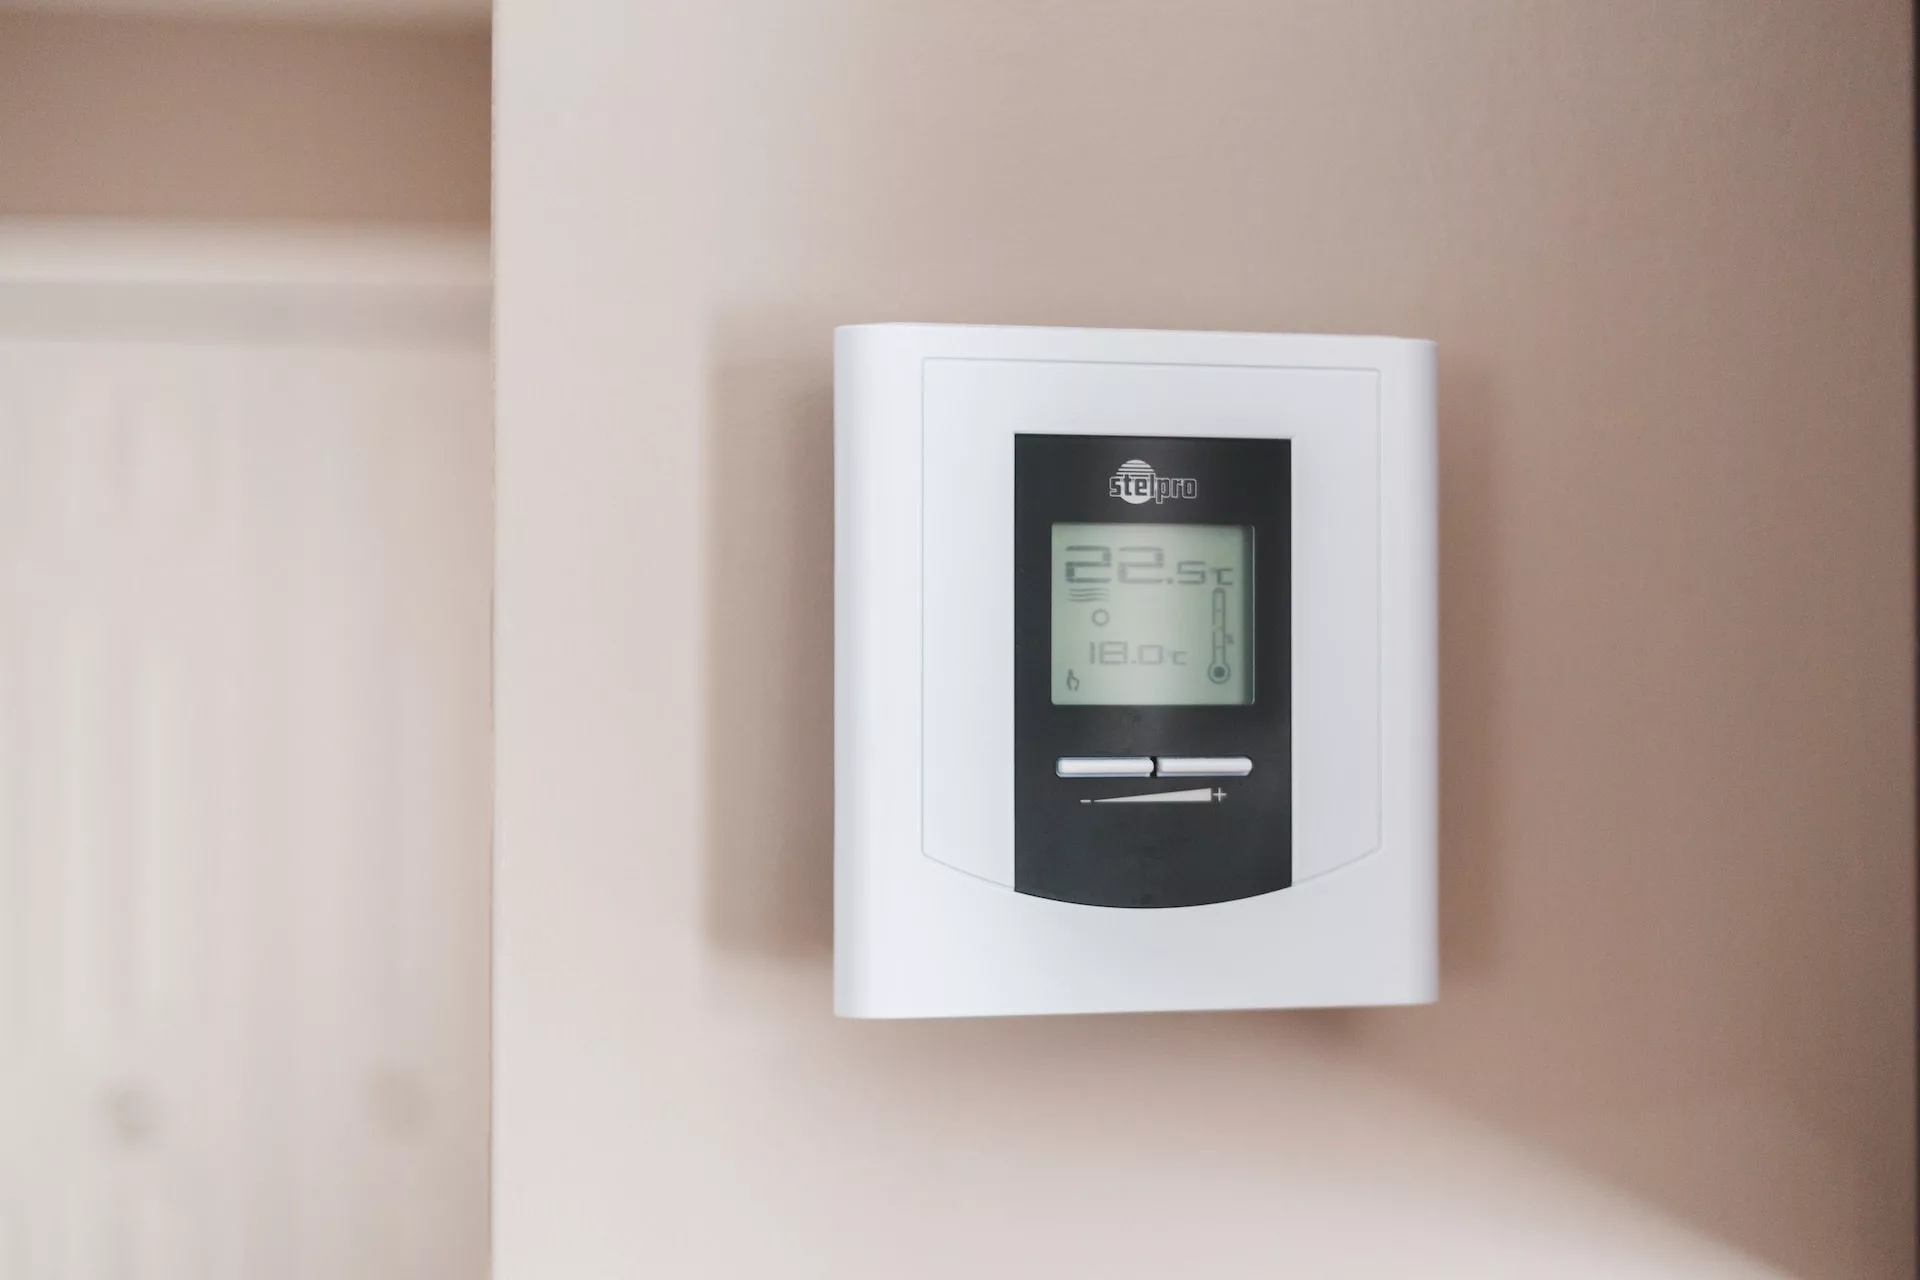 4 Warning Signs That Your Heating System May Need Maintenance or Repair